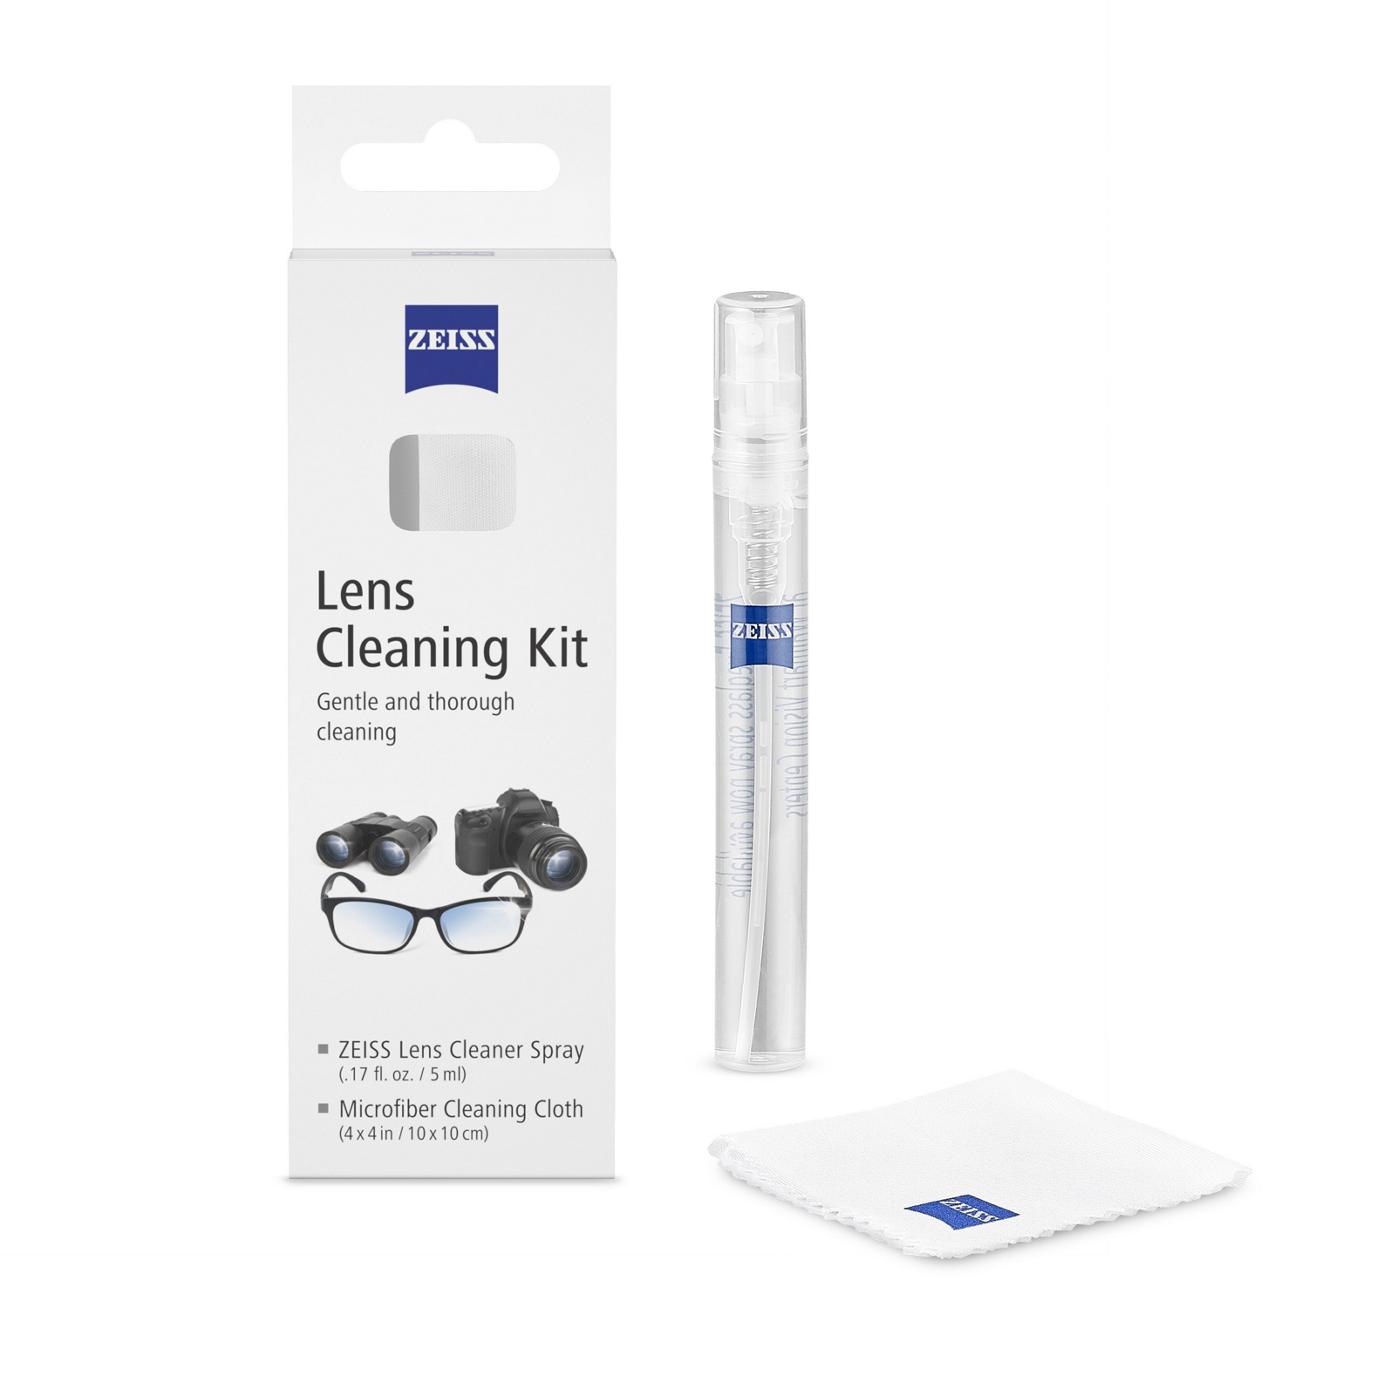 Zeiss Lens Cleaning Kit; image 2 of 2